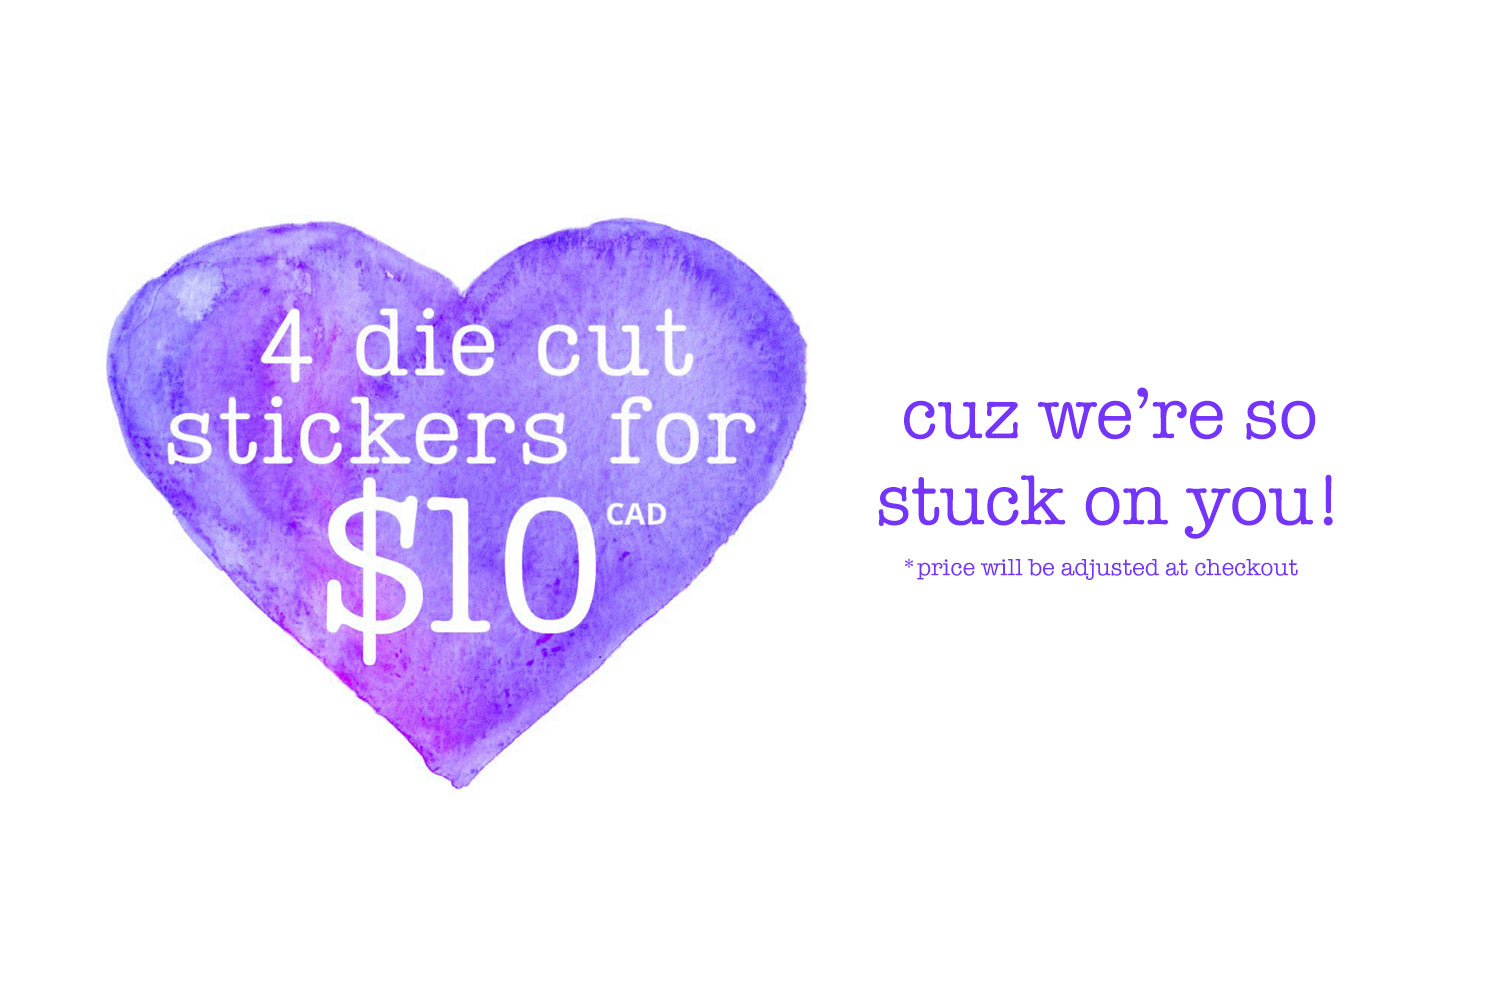 4 die cut stickers for $10CAD cuz we're so stuck on you! * price will be adjusted at checkout